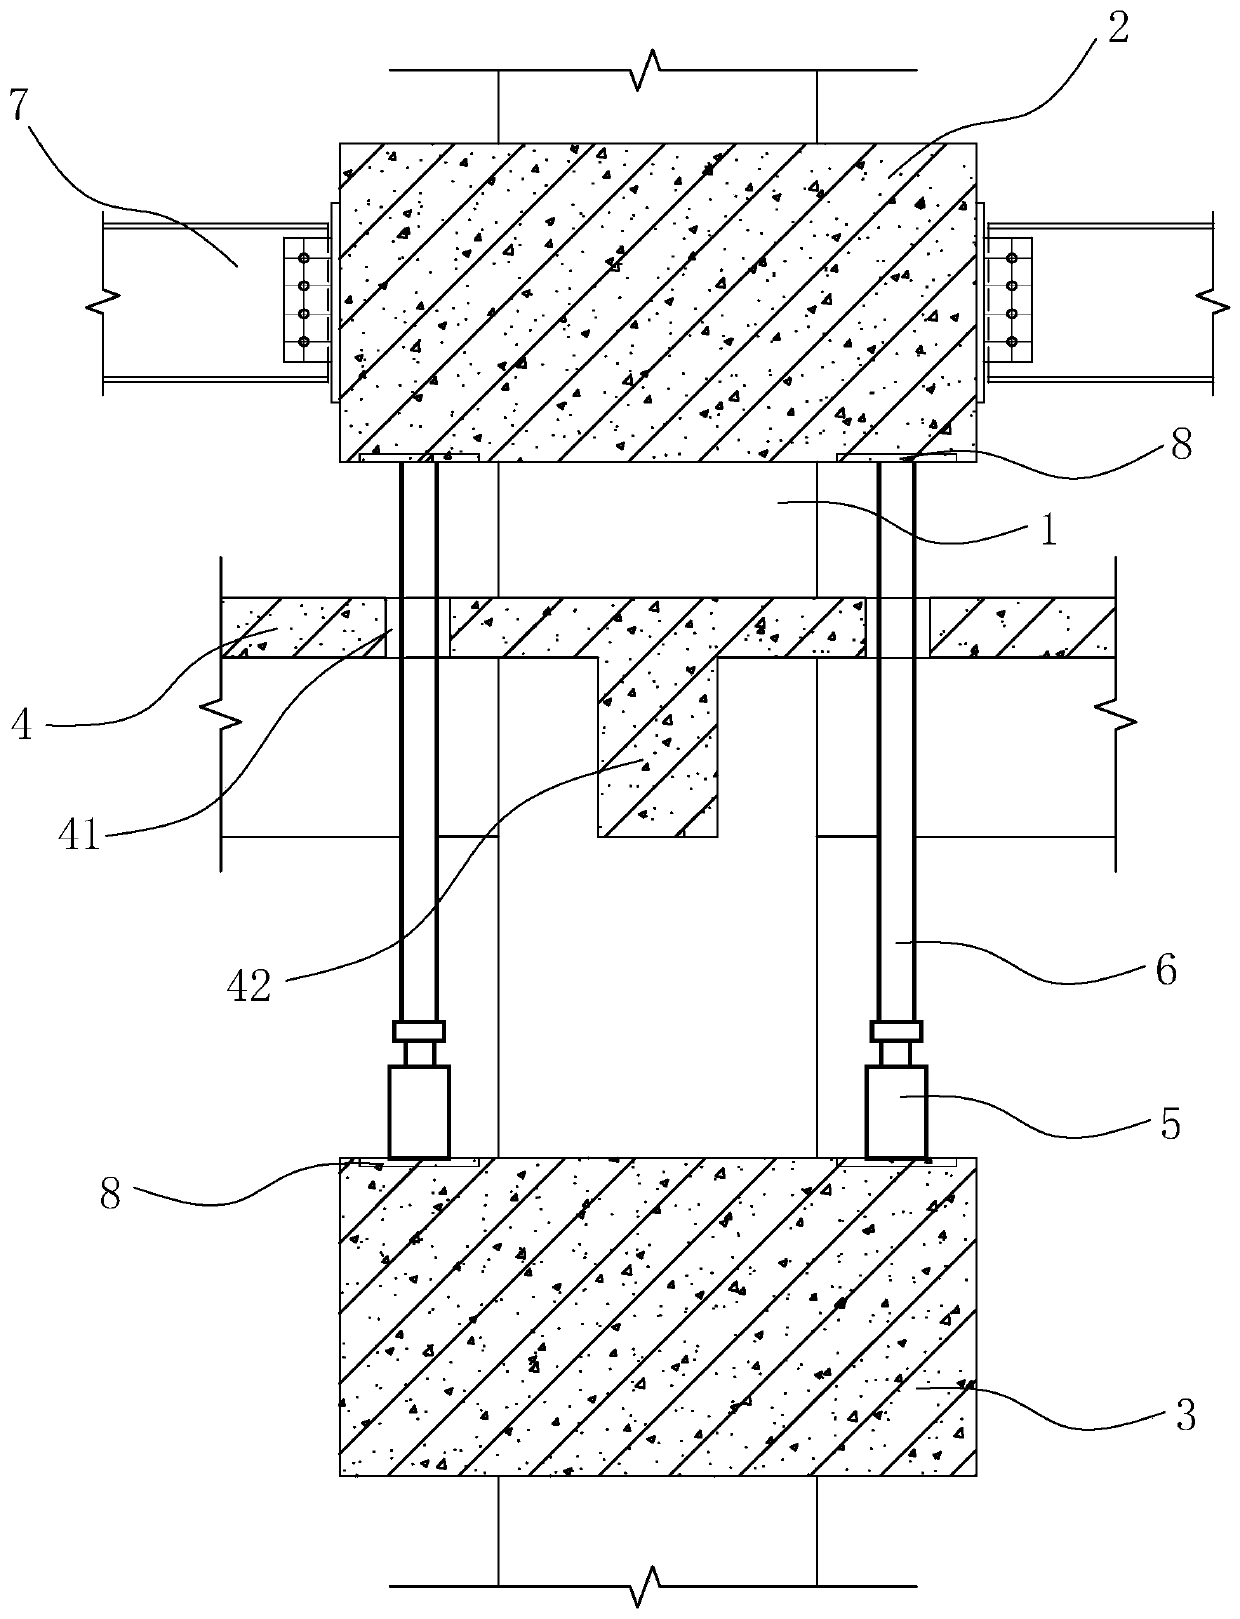 Method for changing floor frame column to on-beam column structure